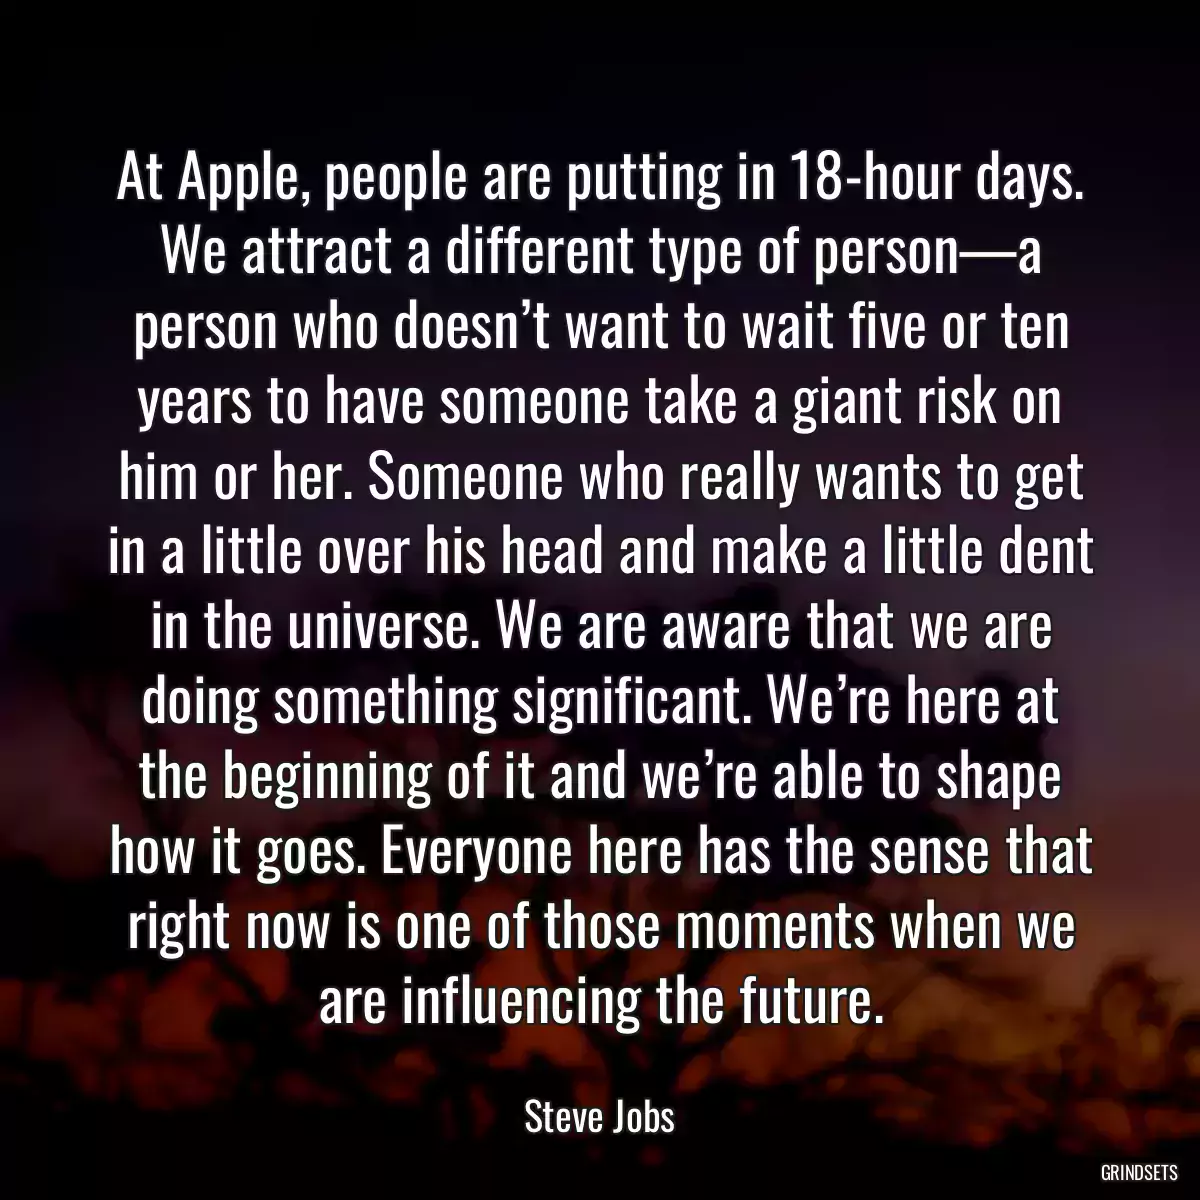 At Apple, people are putting in 18-hour days. We attract a different type of person—a person who doesn’t want to wait five or ten years to have someone take a giant risk on him or her. Someone who really wants to get in a little over his head and make a little dent in the universe. We are aware that we are doing something significant. We’re here at the beginning of it and we’re able to shape how it goes. Everyone here has the sense that right now is one of those moments when we are influencing the future.